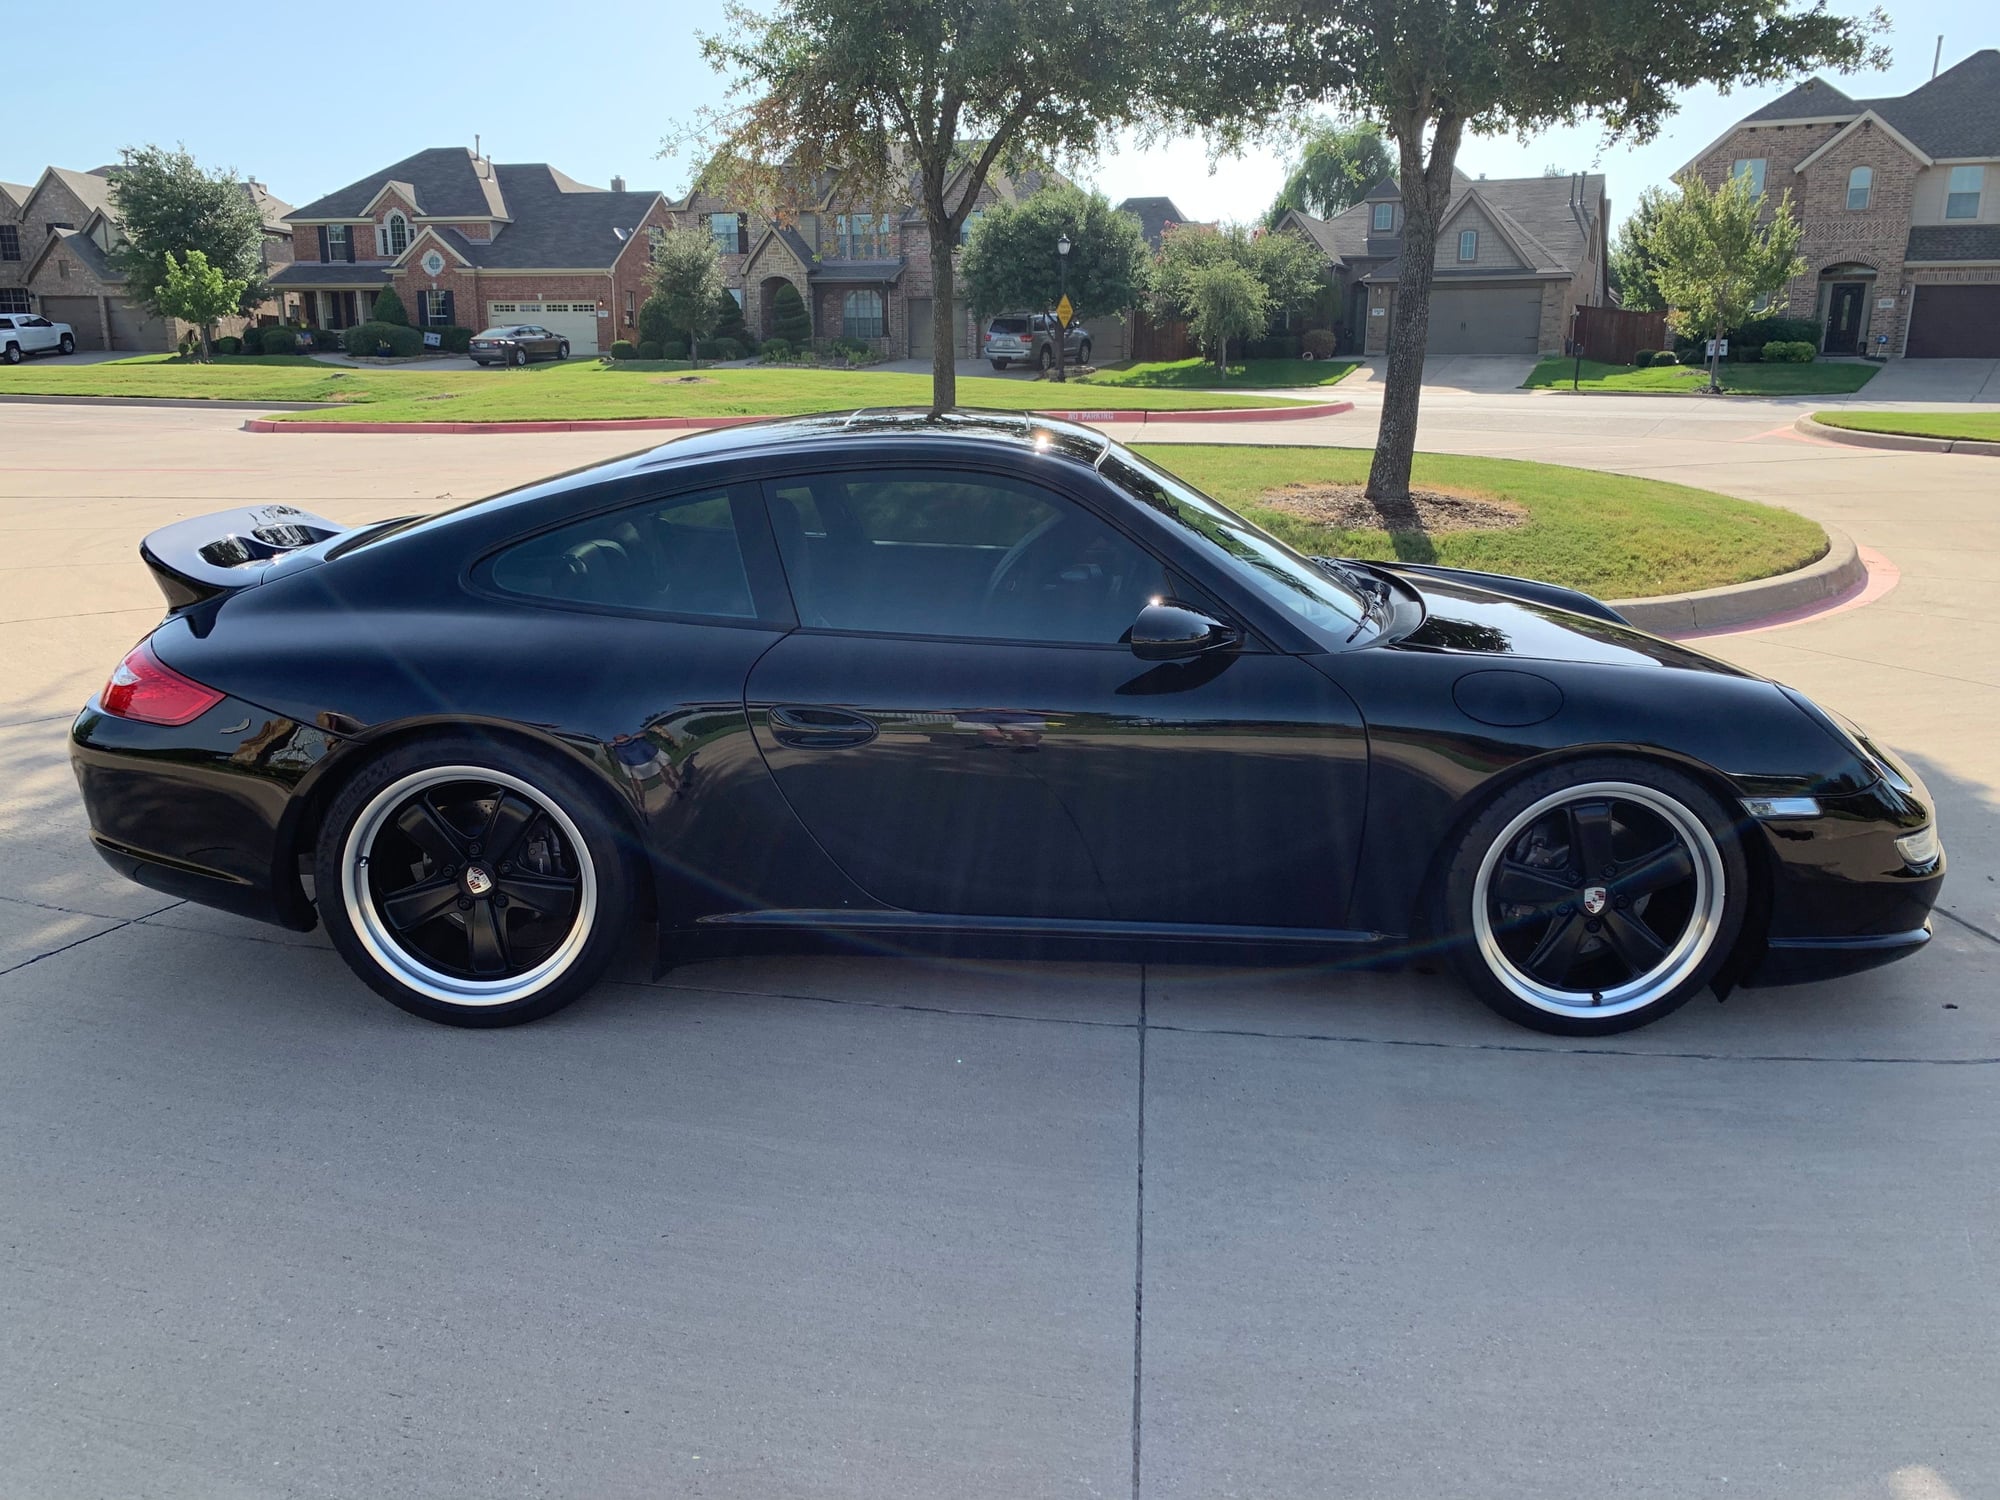 2005 Porsche 911 - 2005 911 C2 - Used - VIN WP0AA29985S715845 - 82,592 Miles - 6 cyl - 2WD - Manual - Coupe - Black - Fort Worth, TX 76244, United States